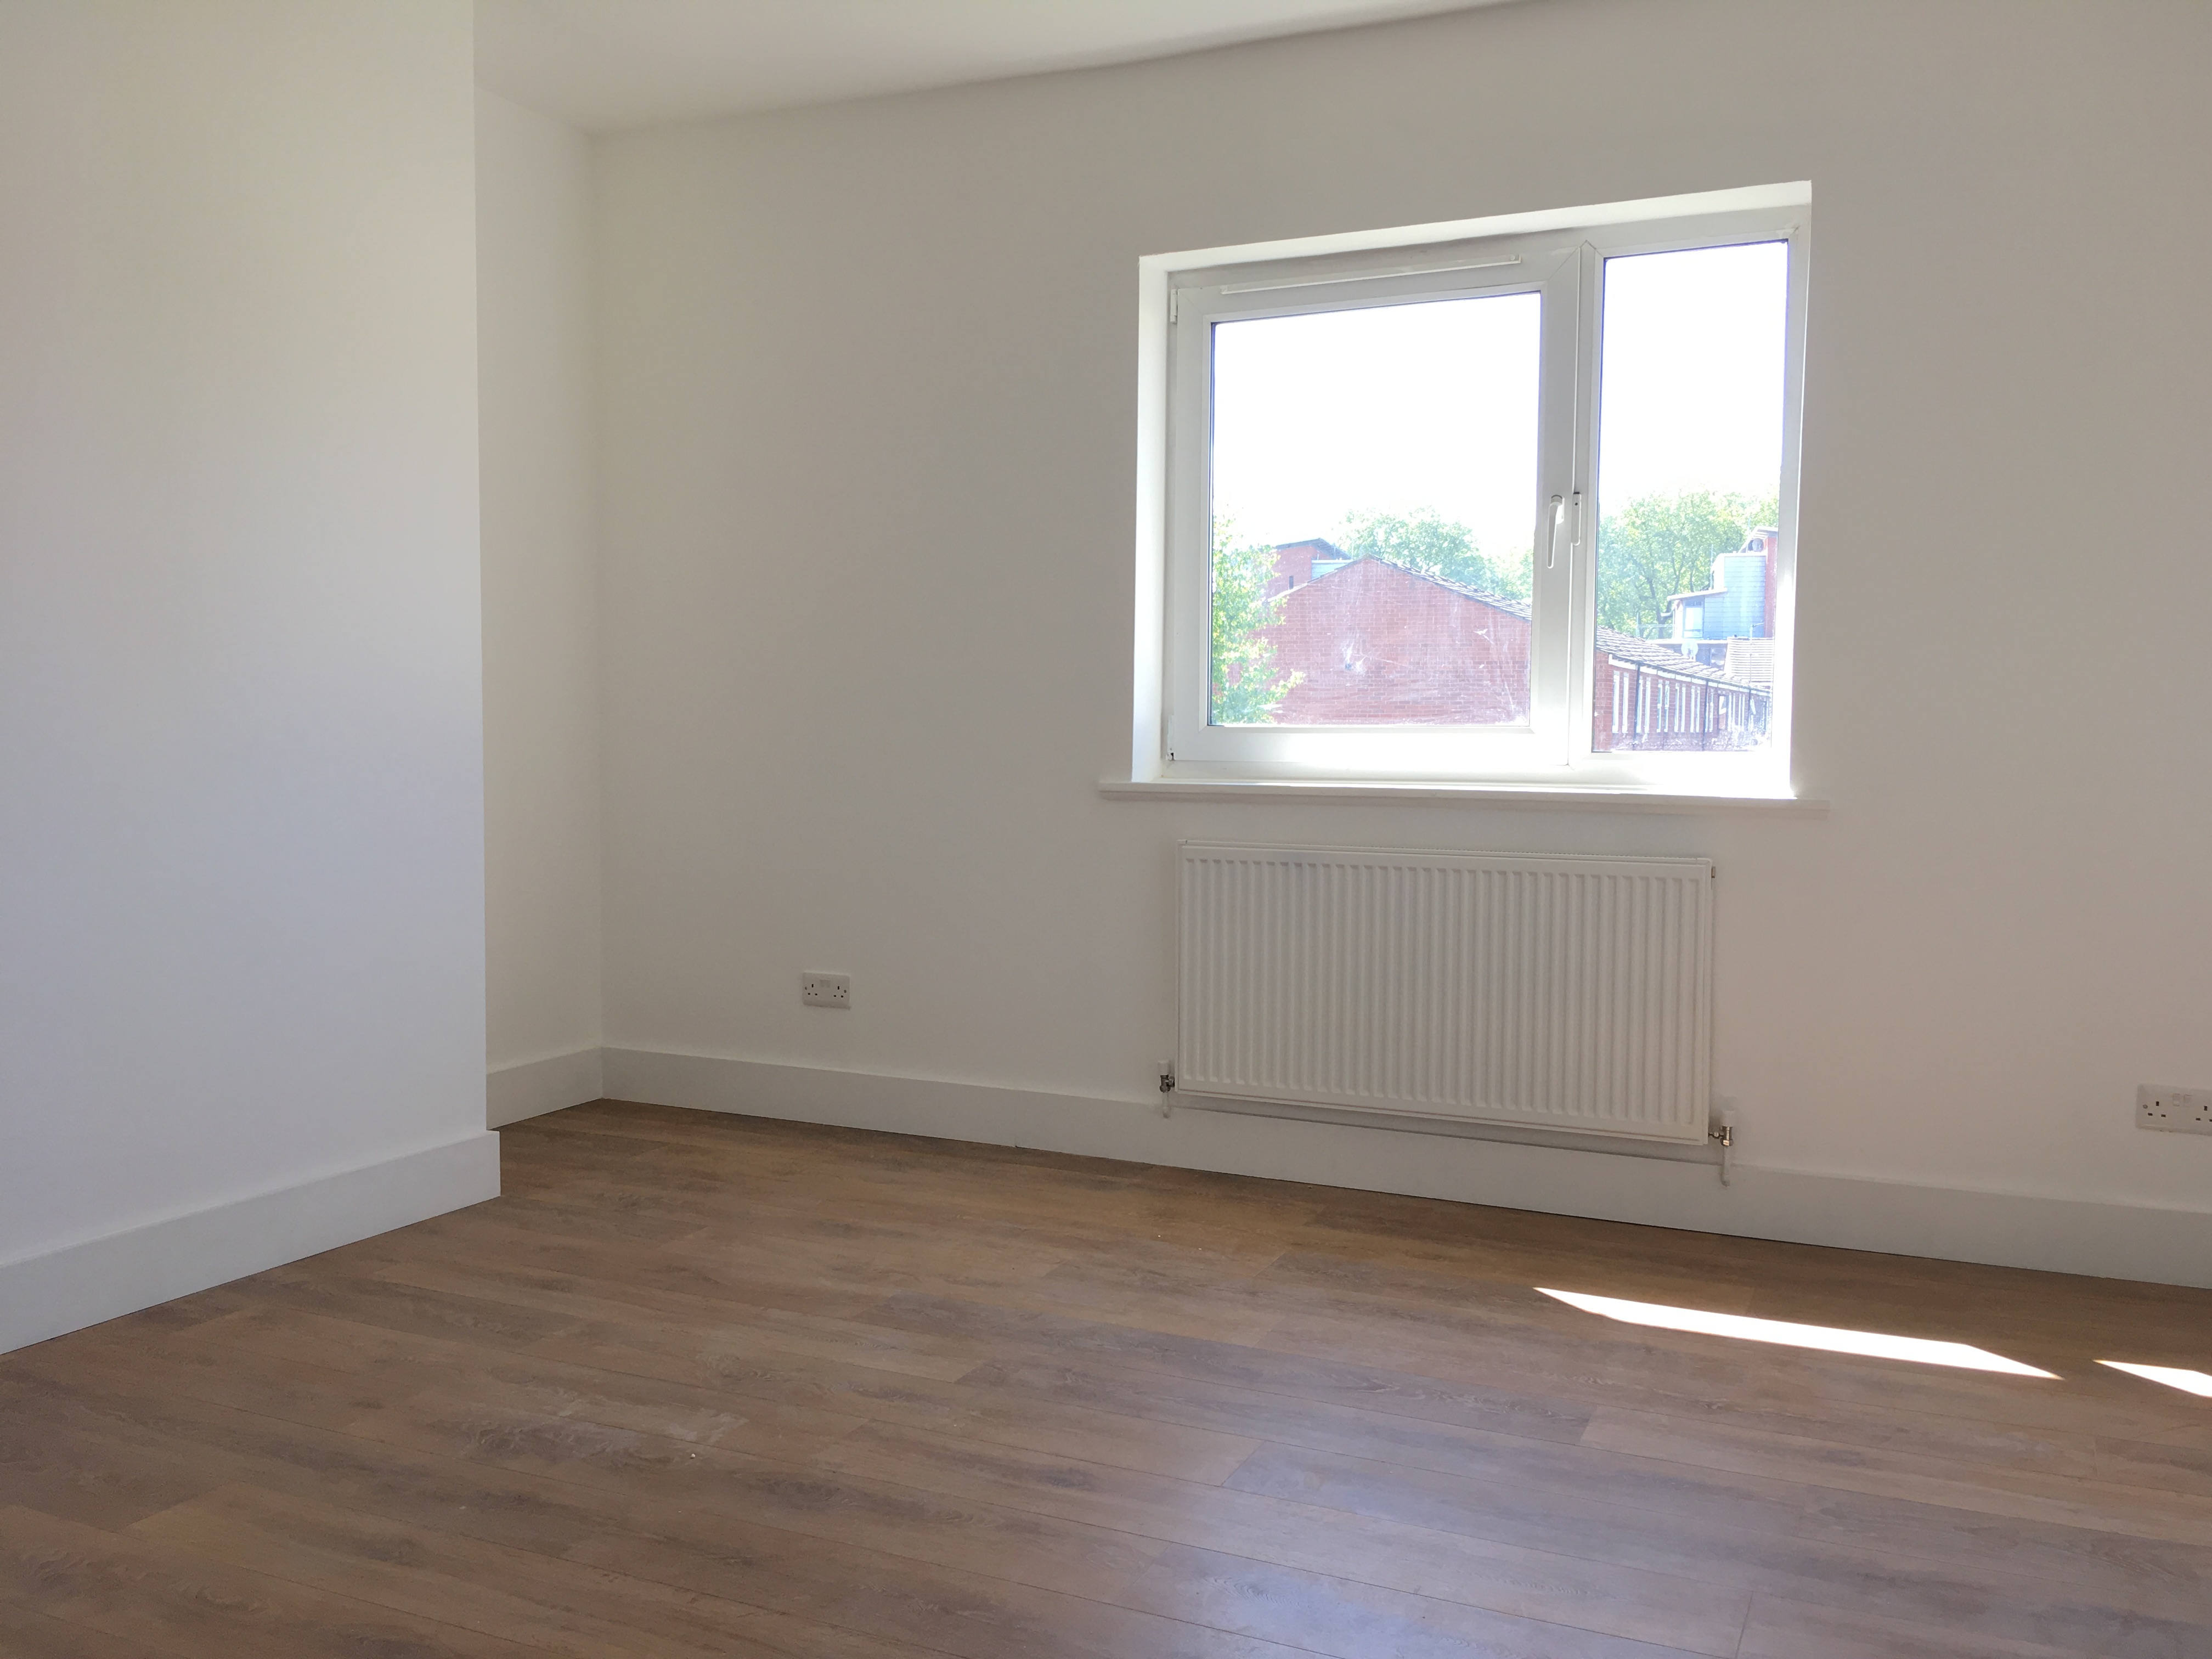 Spacious 2/3 bedroom flat to let Upper Clapton, Hackney E5.